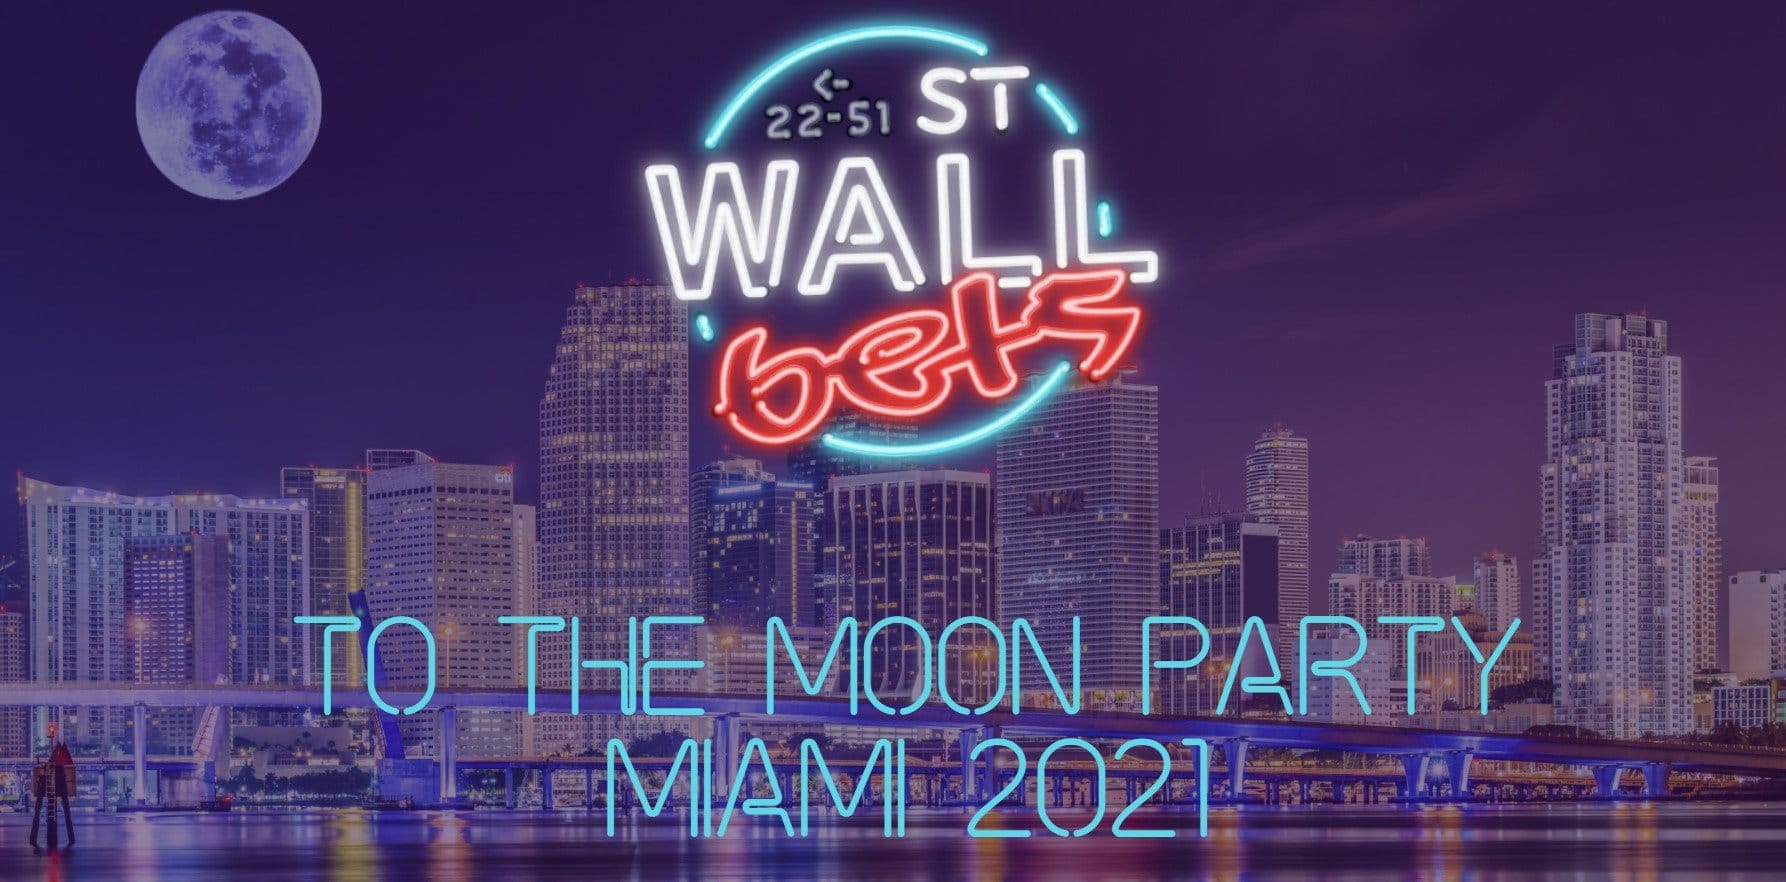 WallStreetBets NFT Event at Art Basel Miami